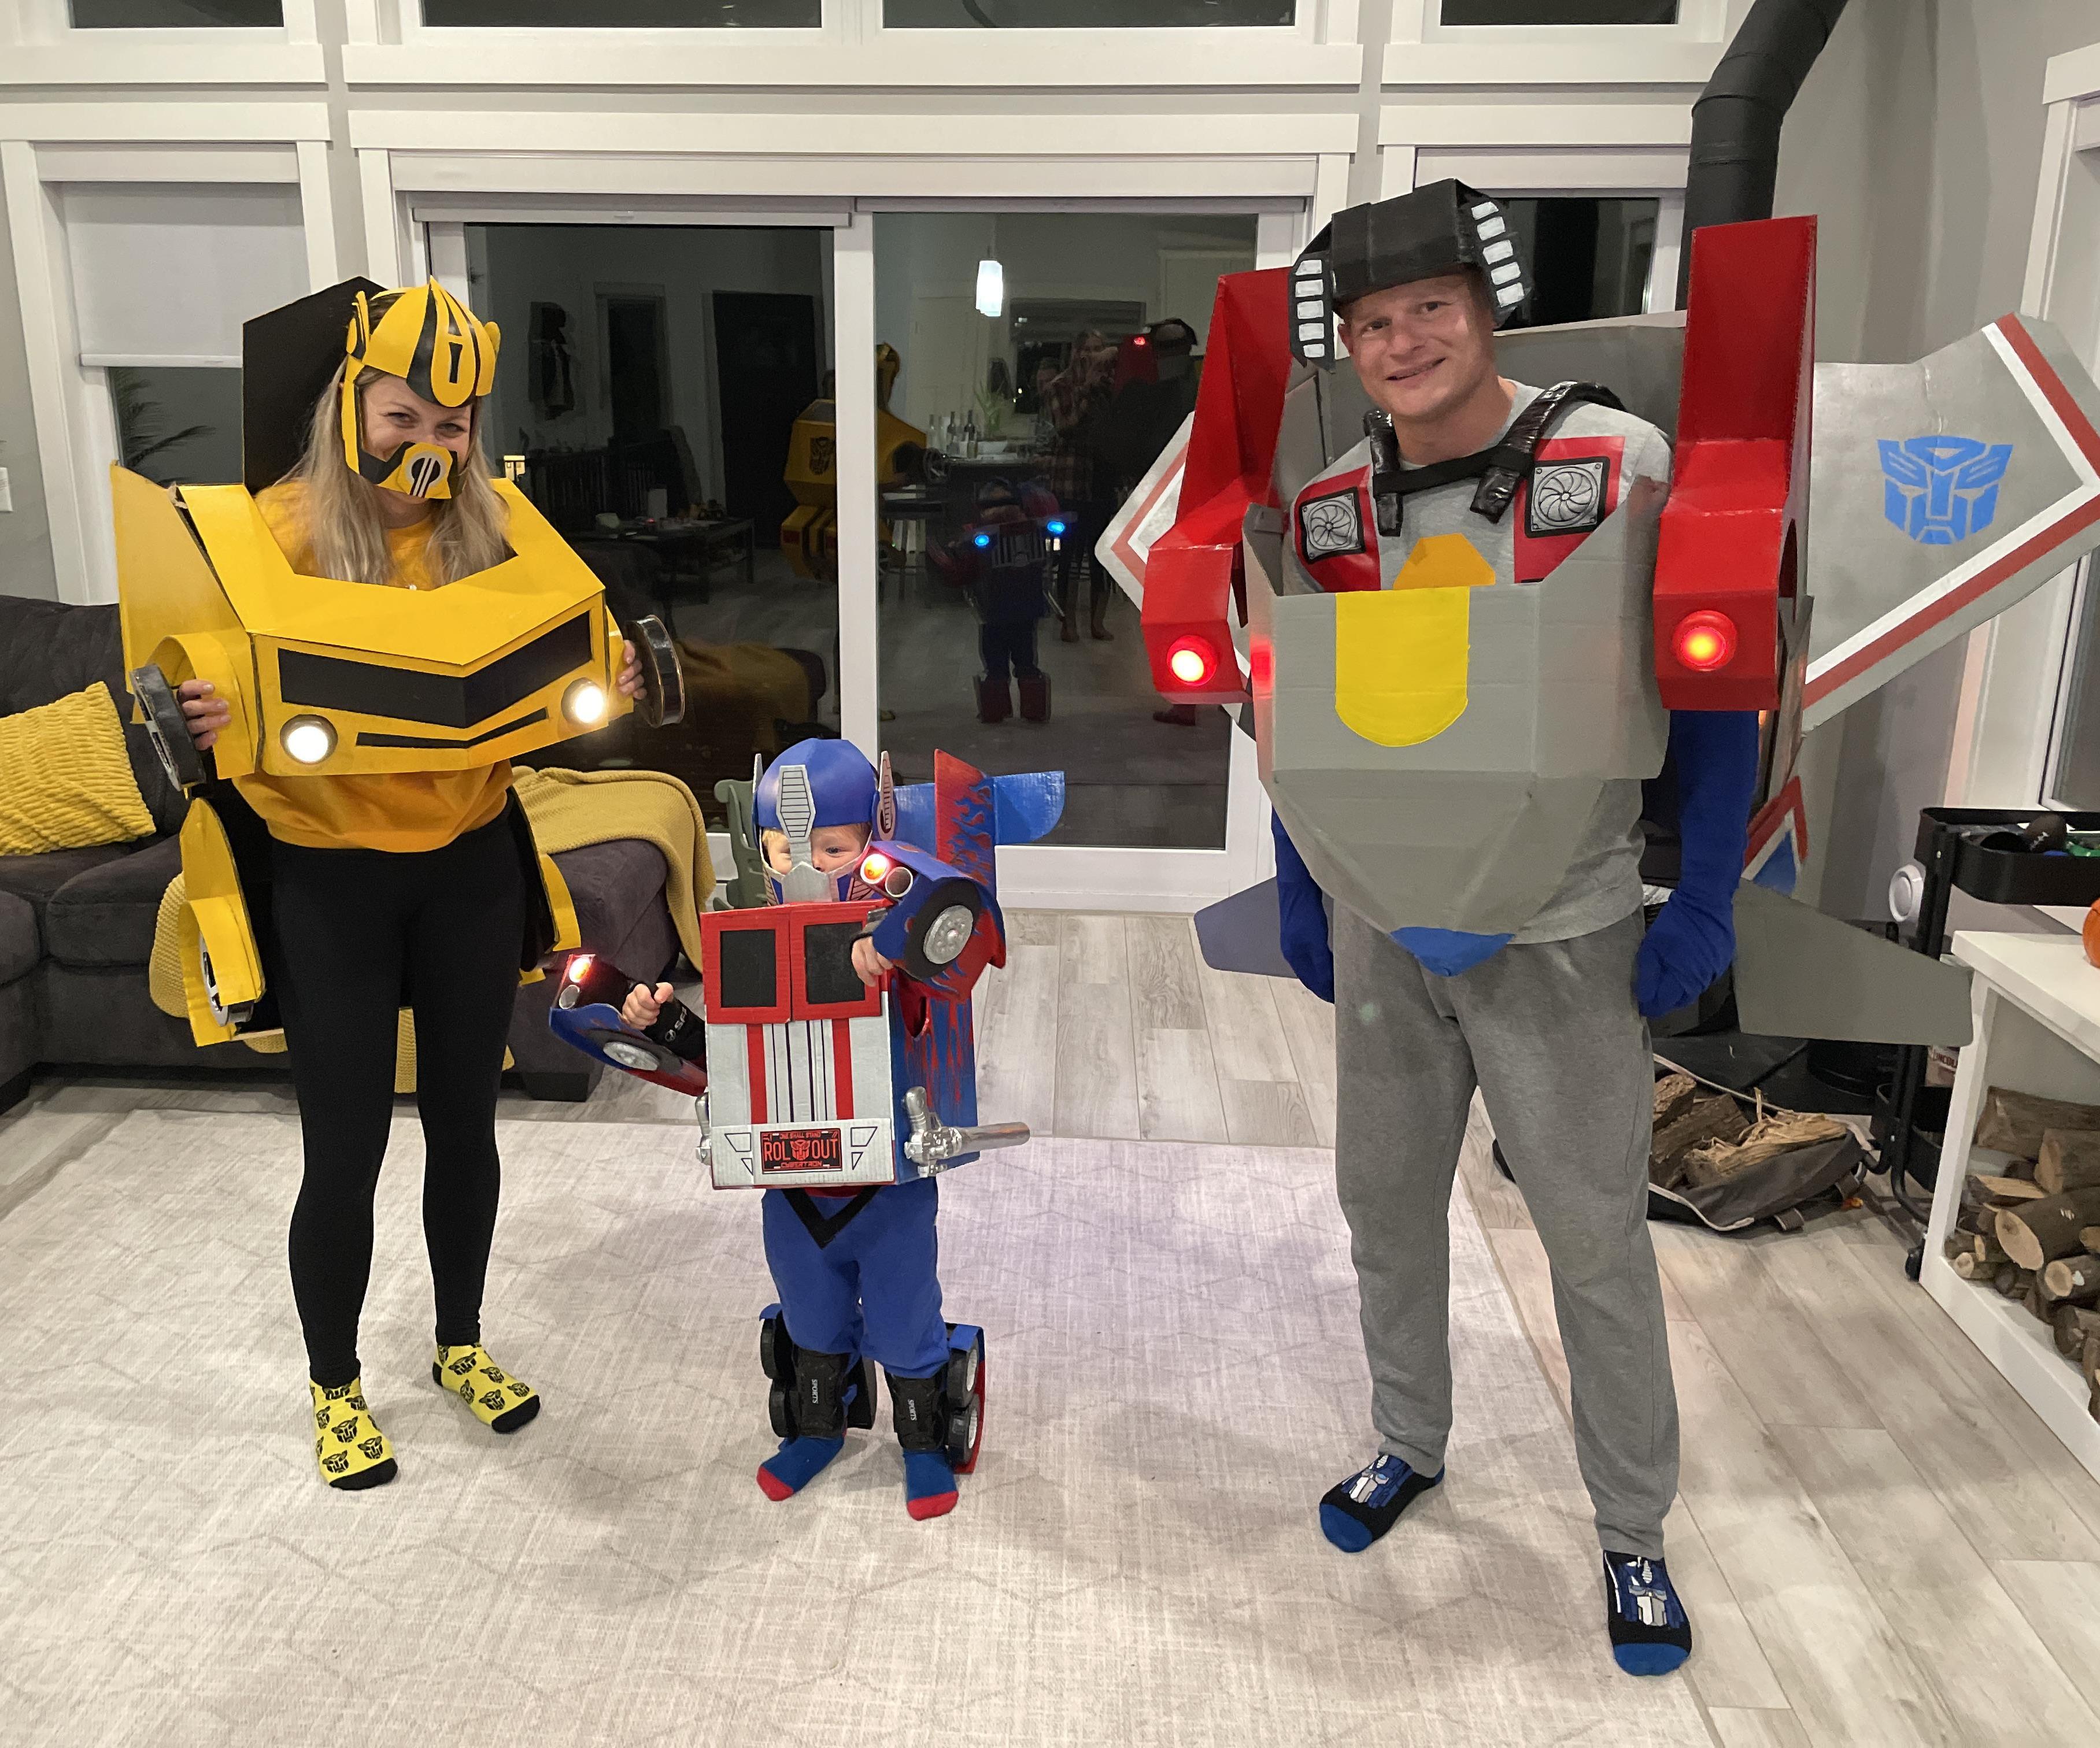 Transformers Group Costume